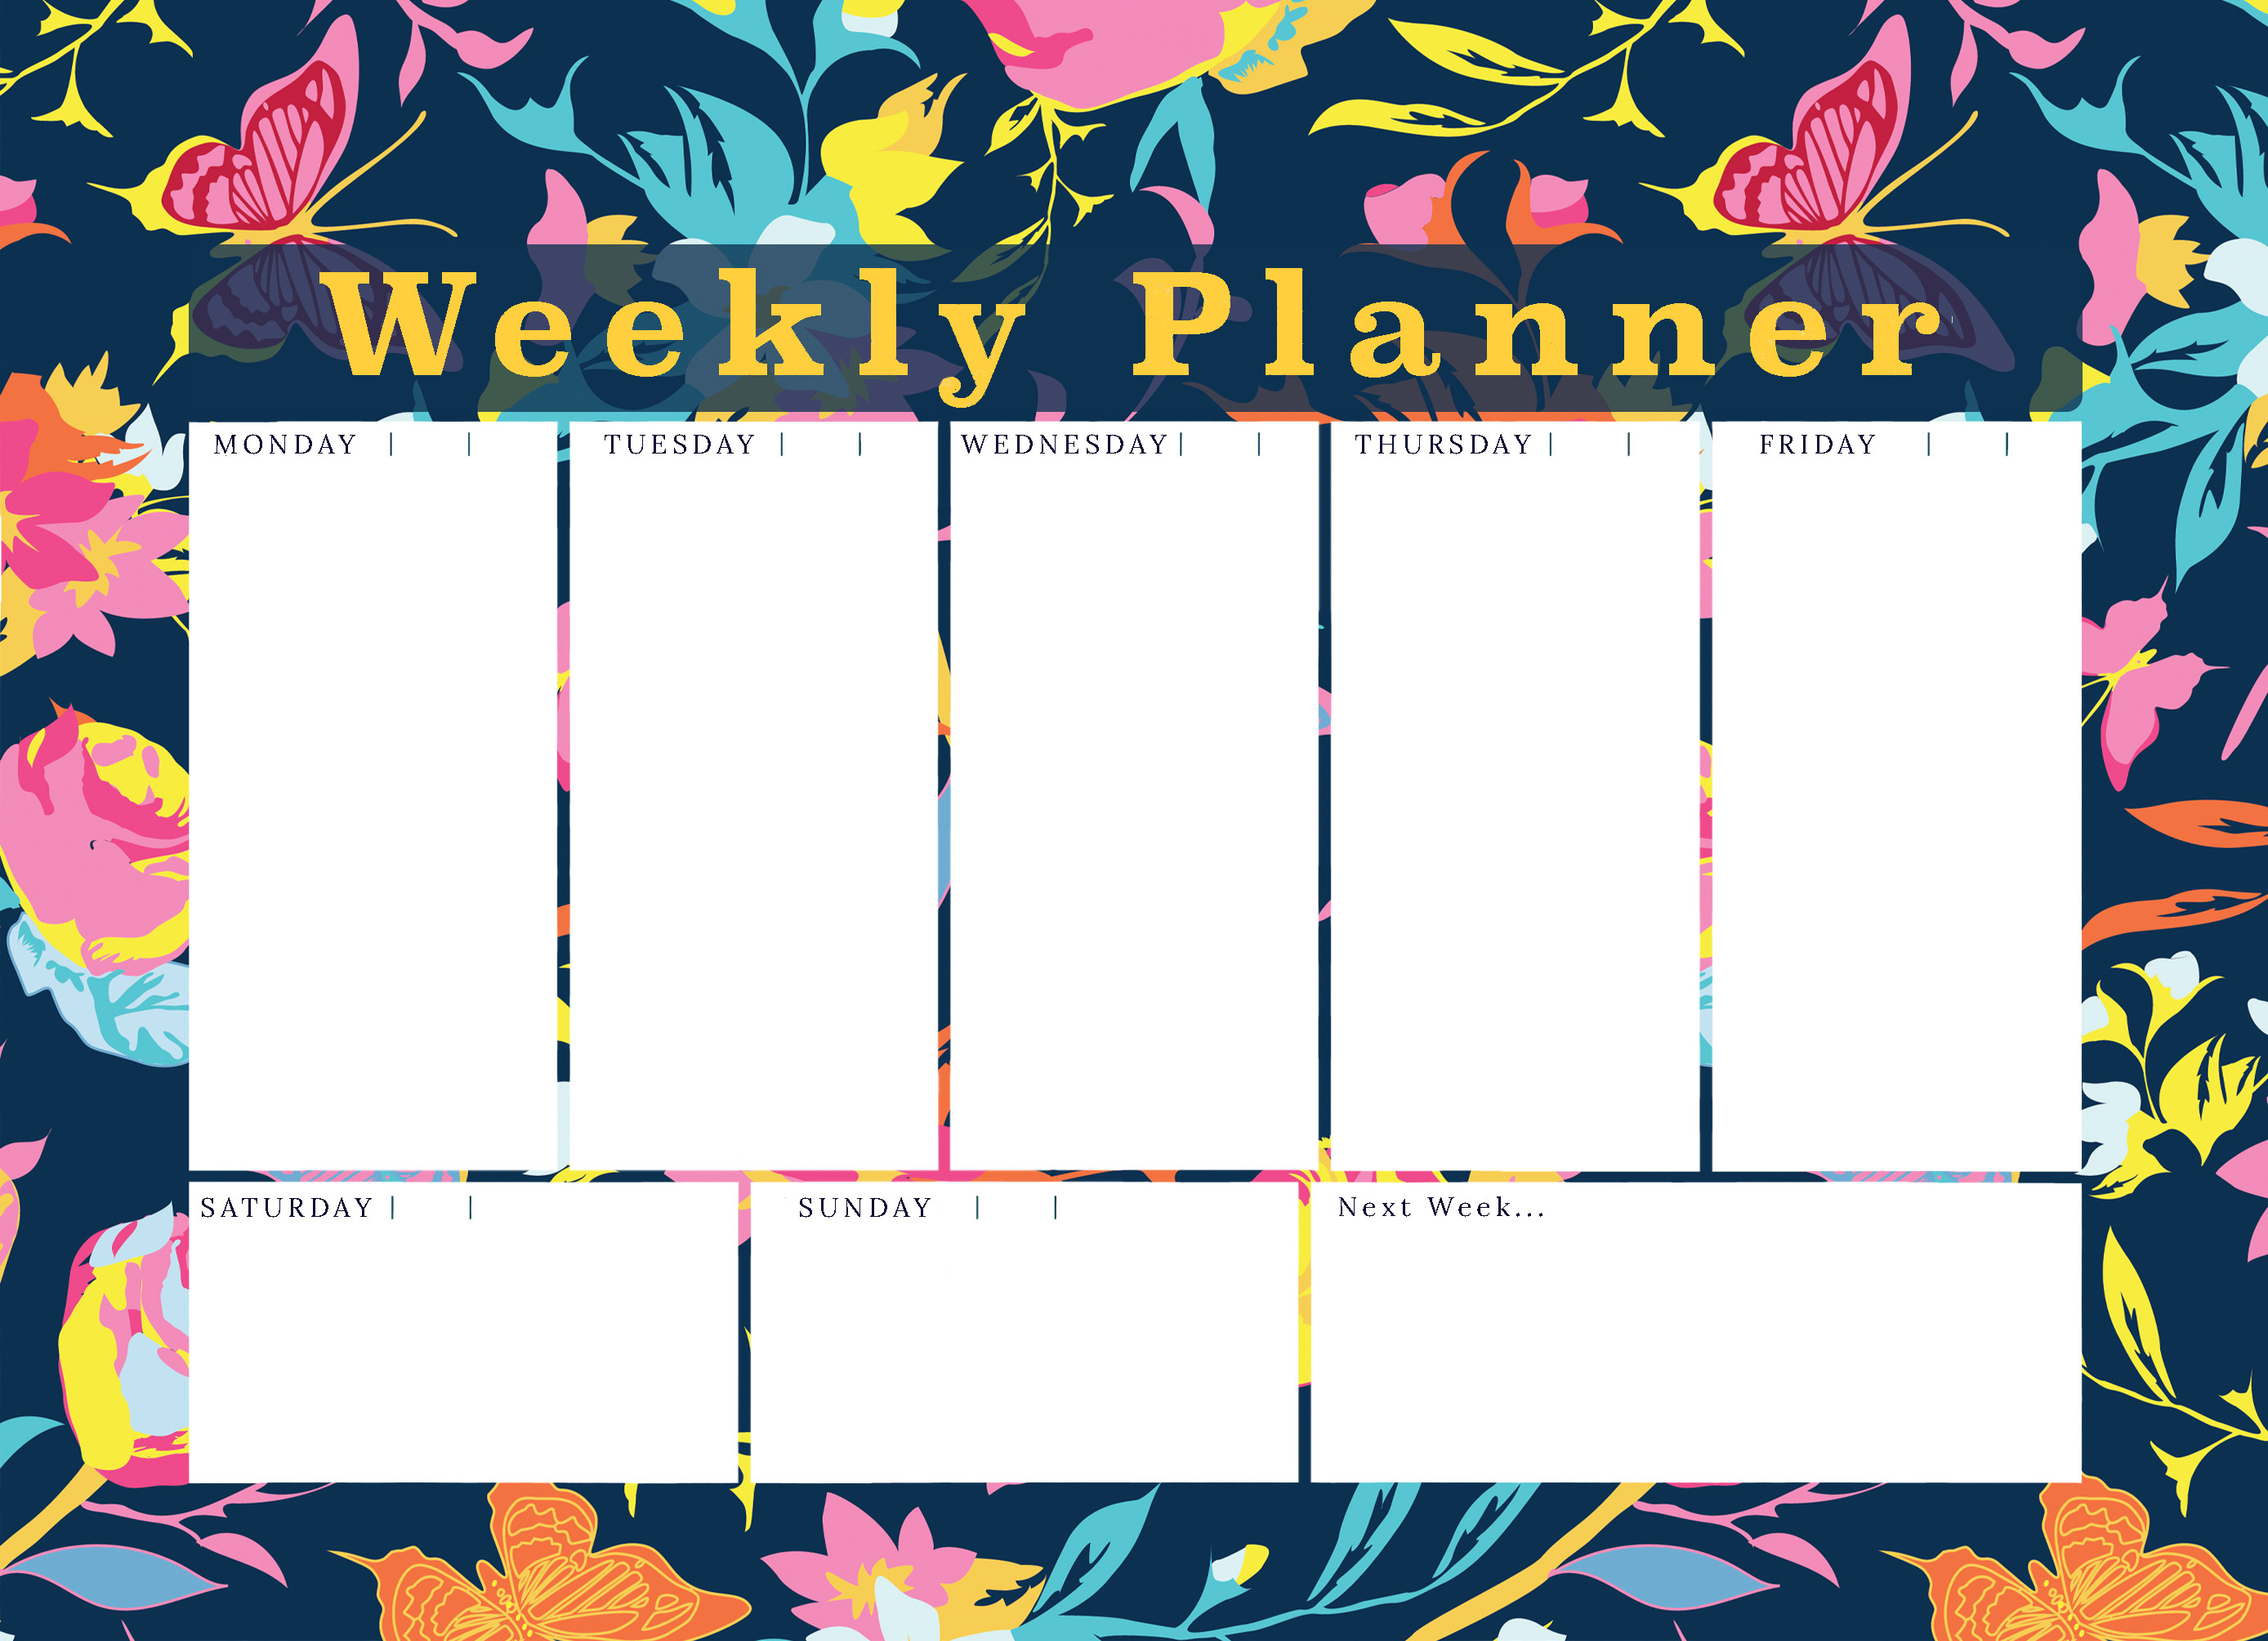 2776x2008 ... like a weekly planner alongside the wallpaper calendar downloads, just  because I need a planner at the moment and thought it would be nice to  share it.